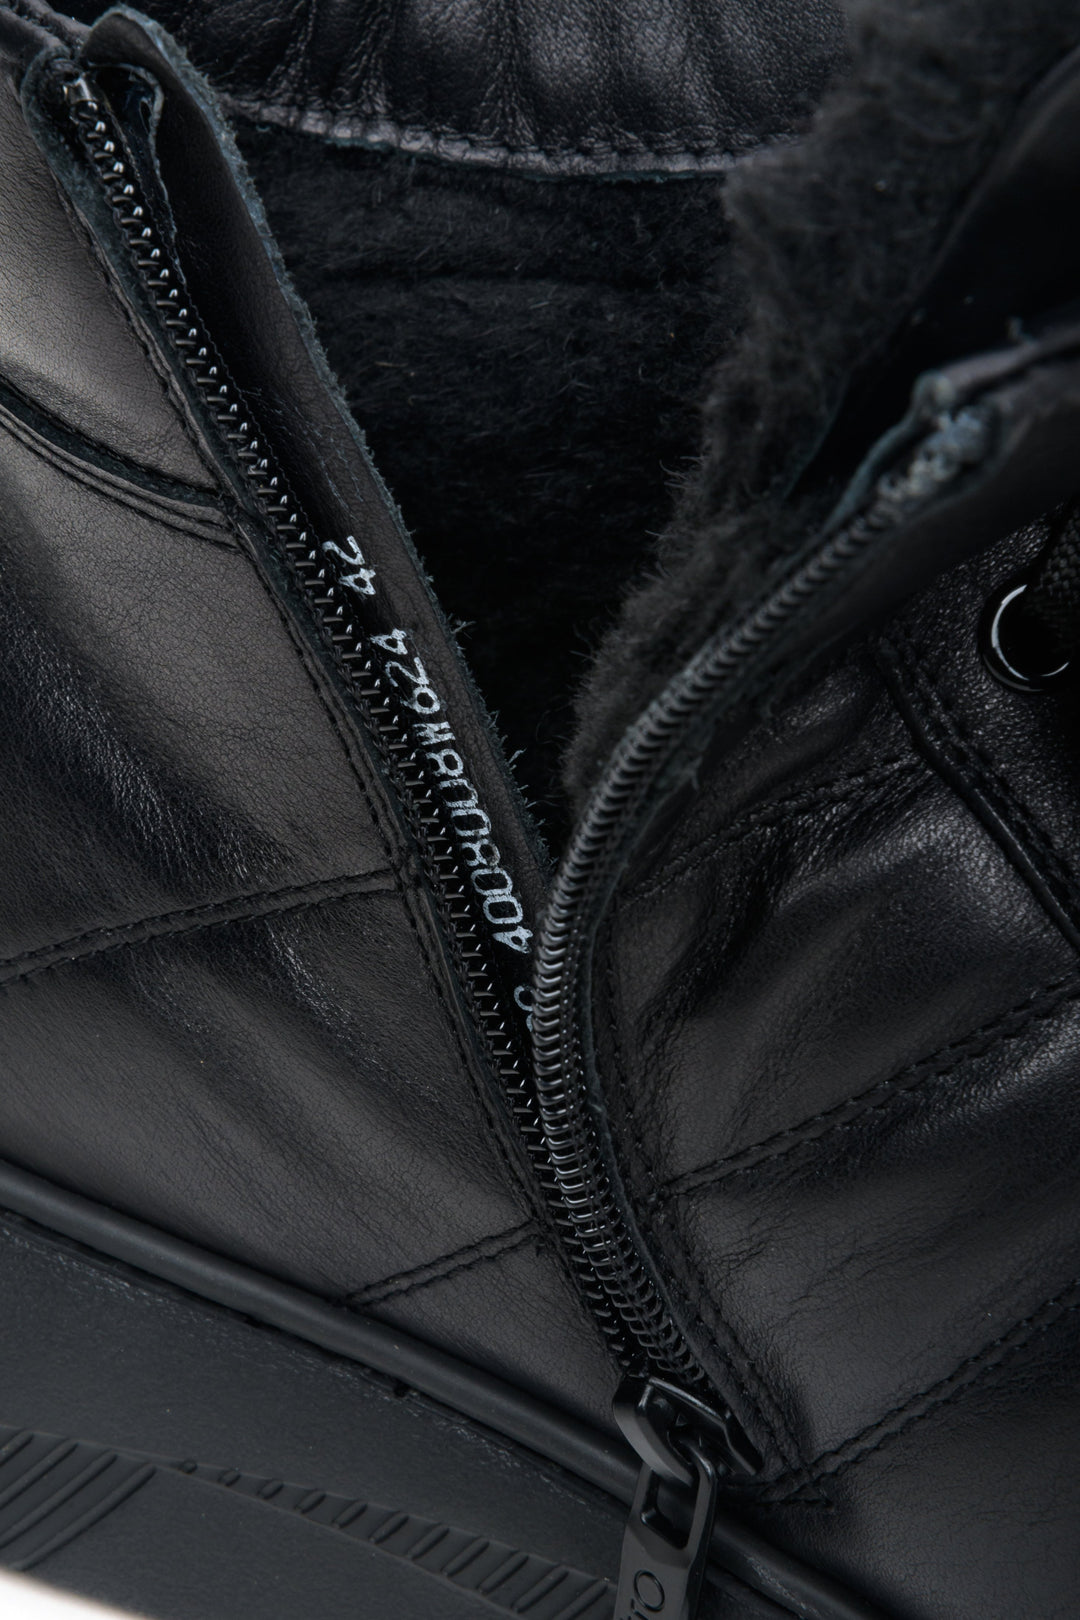 Men's black leather  winter sneakers - close-up of the interior.